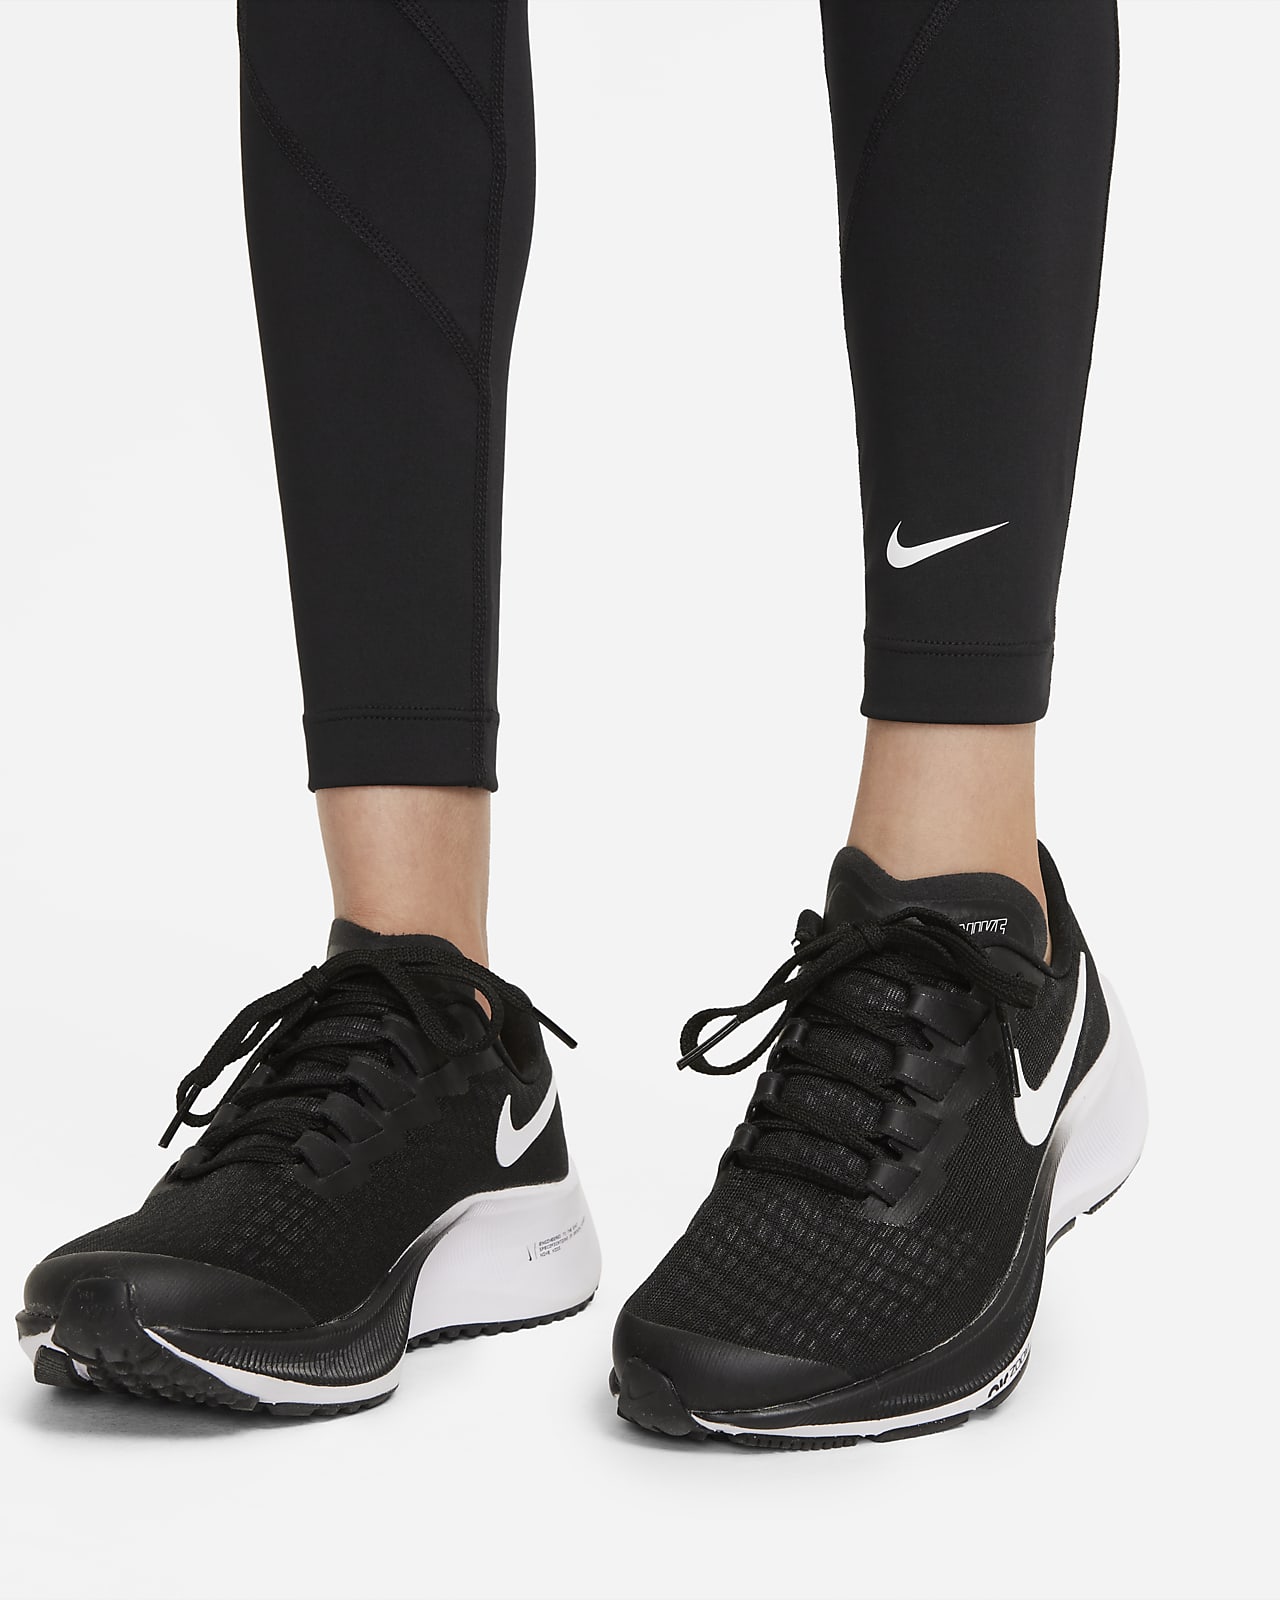 Legíny Nike Dry-Fit One Luxe Jr DD8015 010